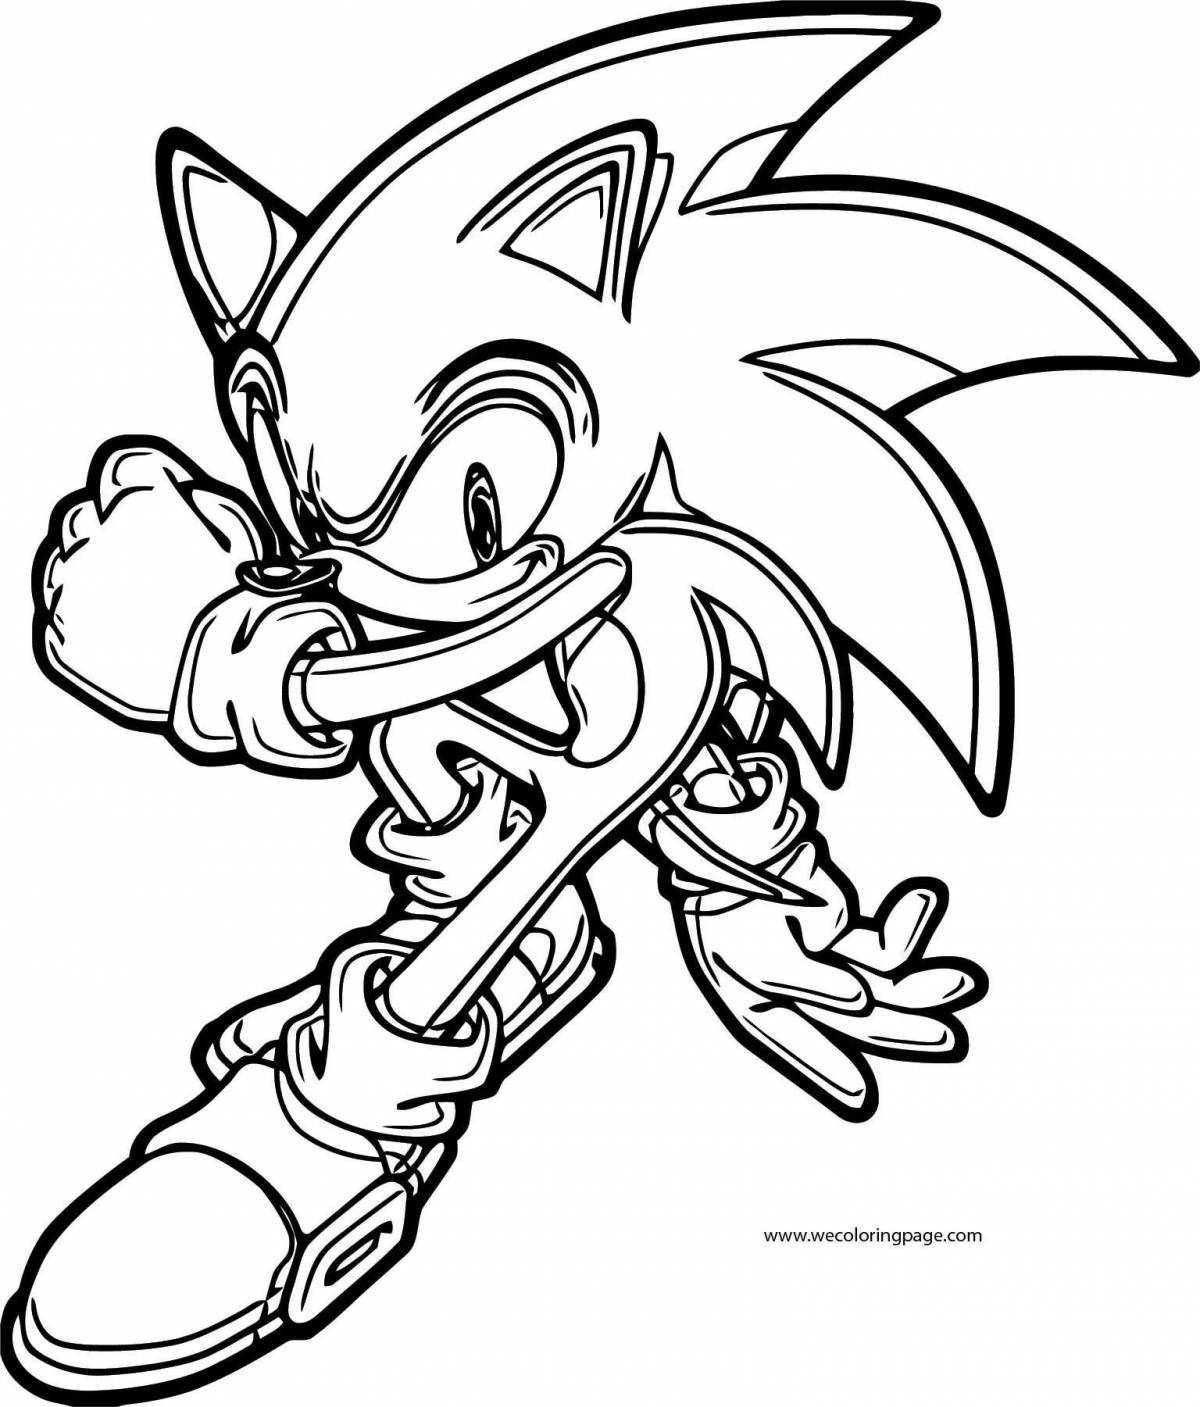 Incredible sonic monster coloring book